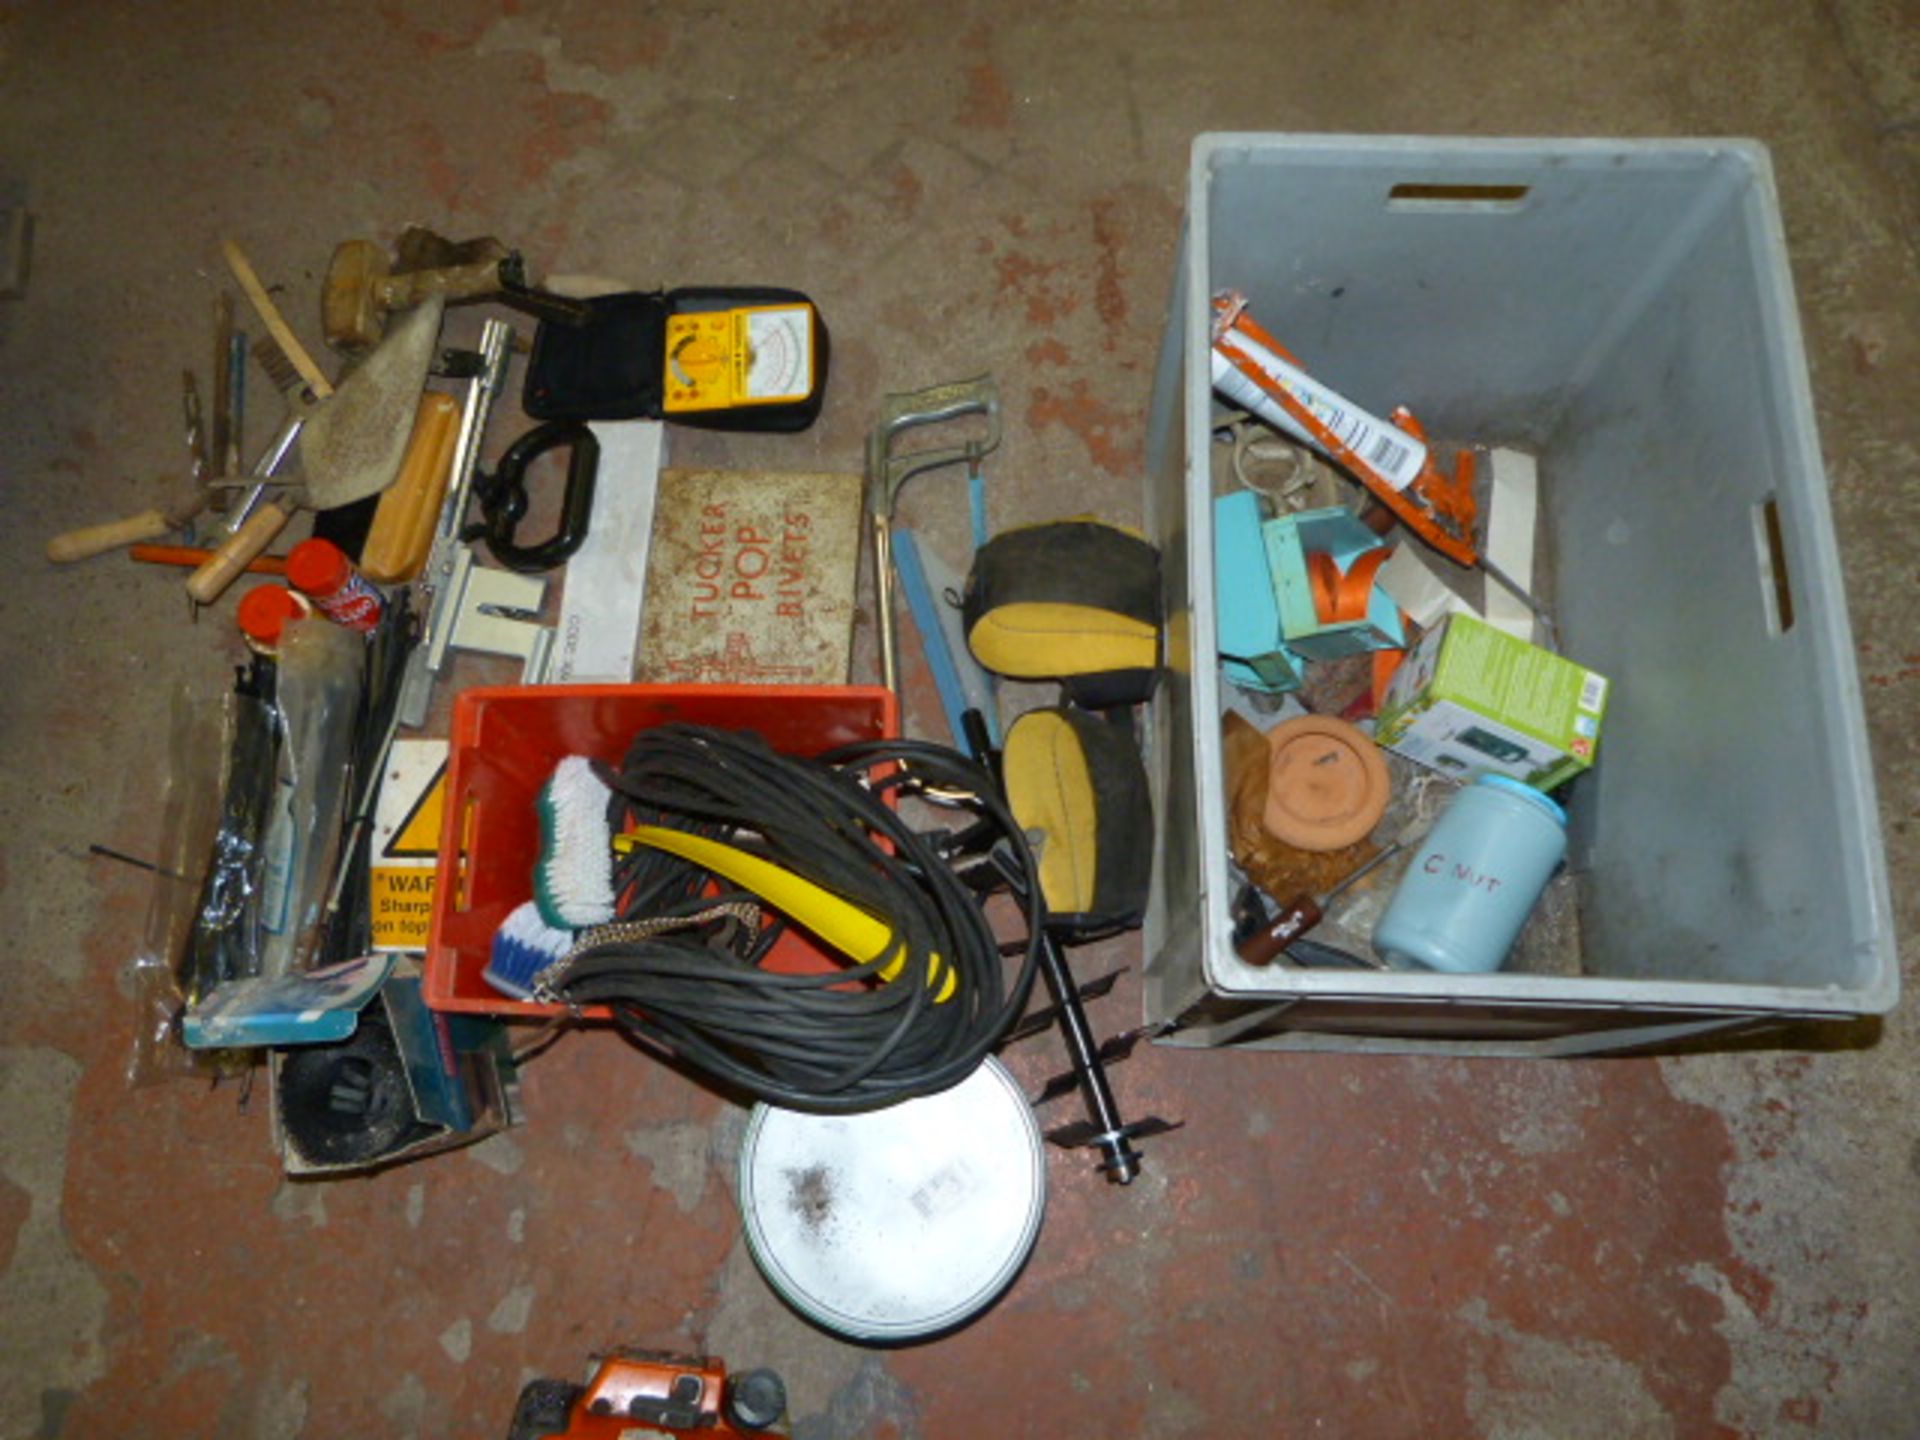 Tools and Accessories Including Cable Ties, Pop Rivet Gun, Gutter Guard, etc. (box not included)